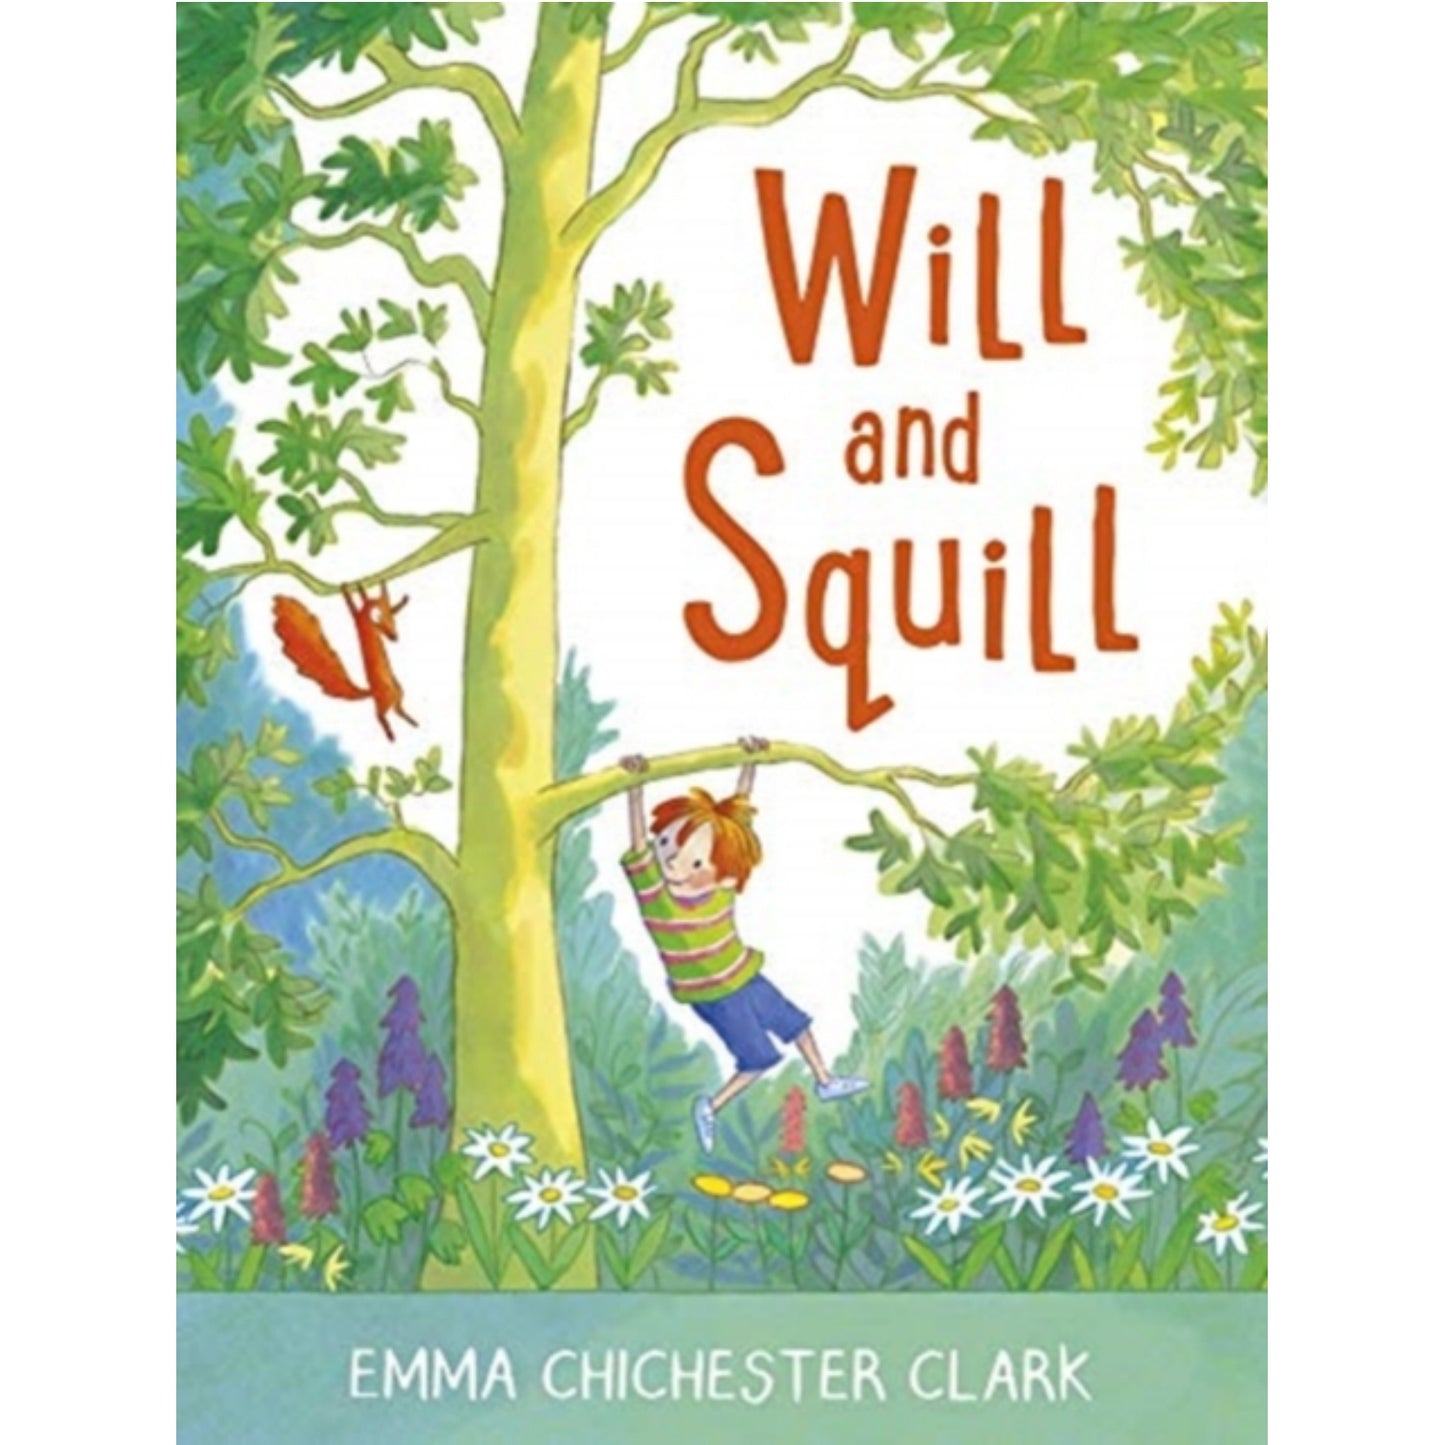 Will And Squill | Children’s Book on Friendship